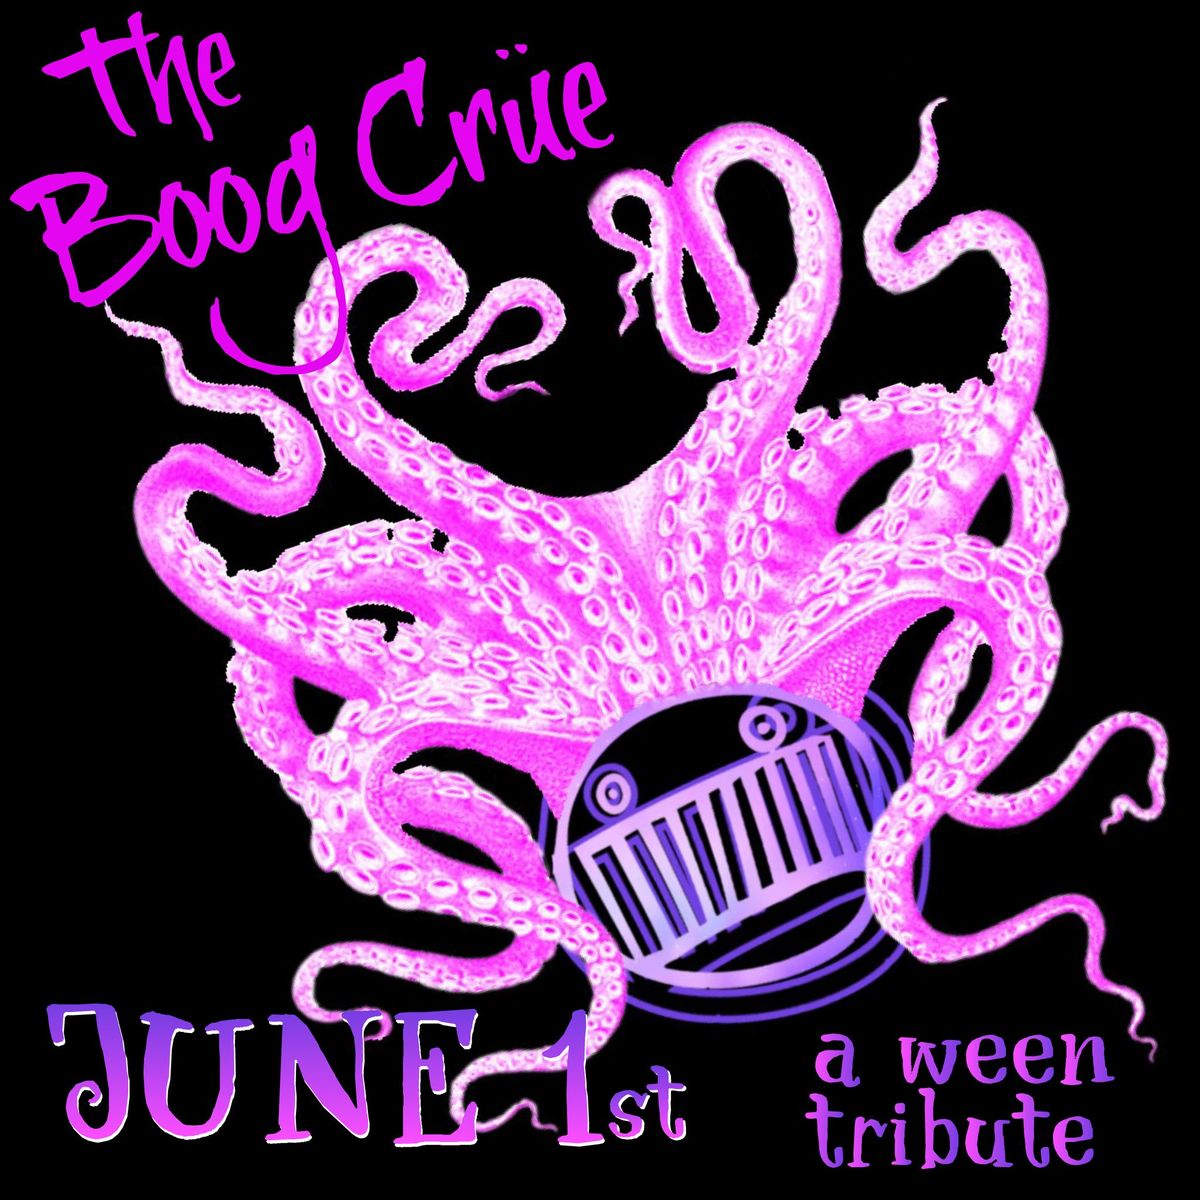 The Boog Crue (A tribute to Ween) @ Blue Island beer Co